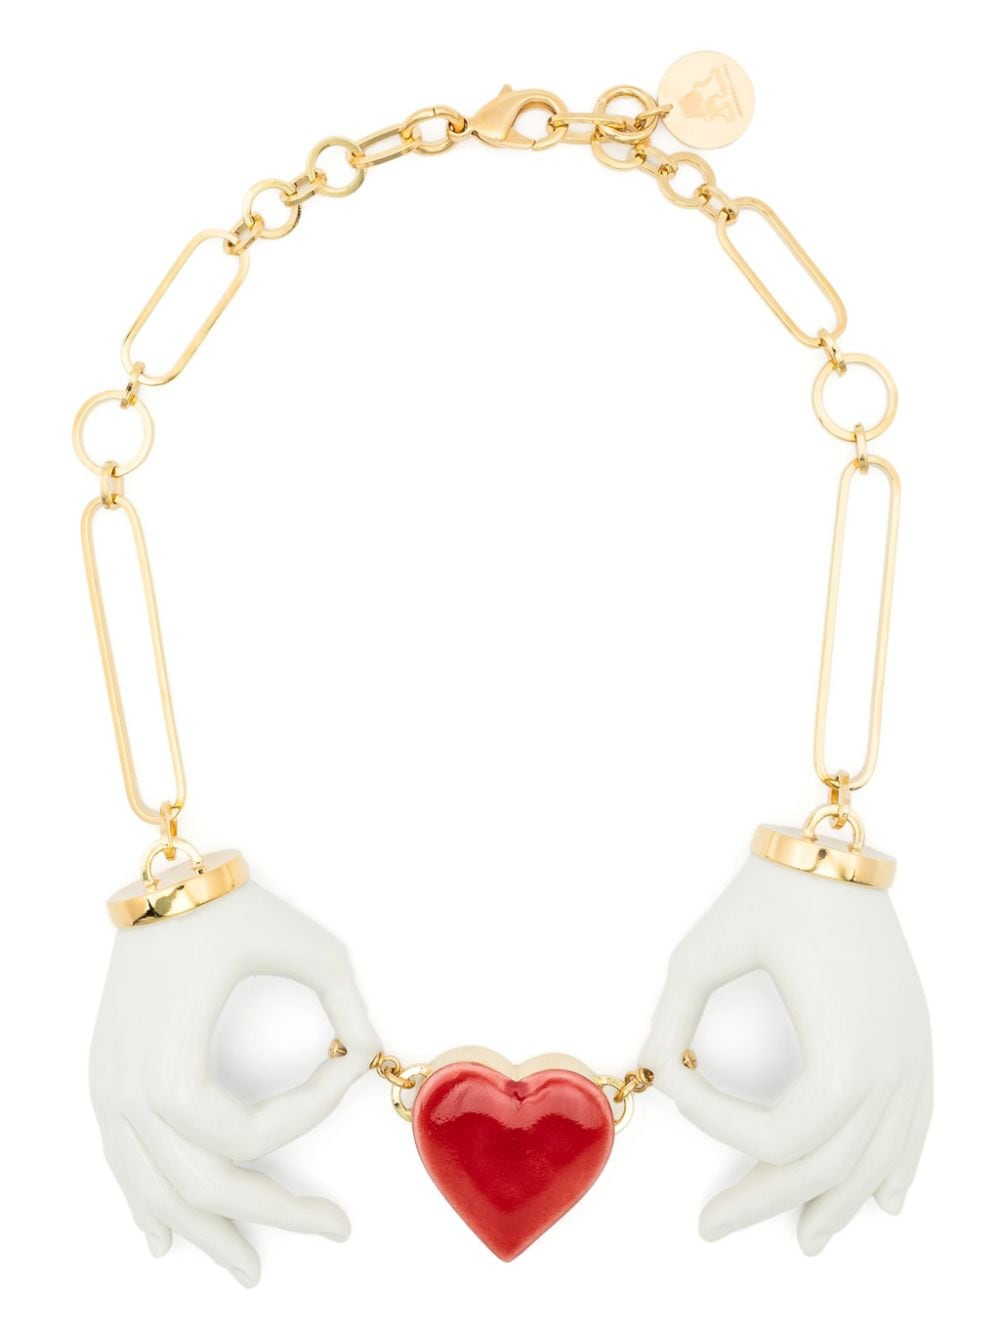 Andres Gallardo Heart Couple Hands Necklace In Gold